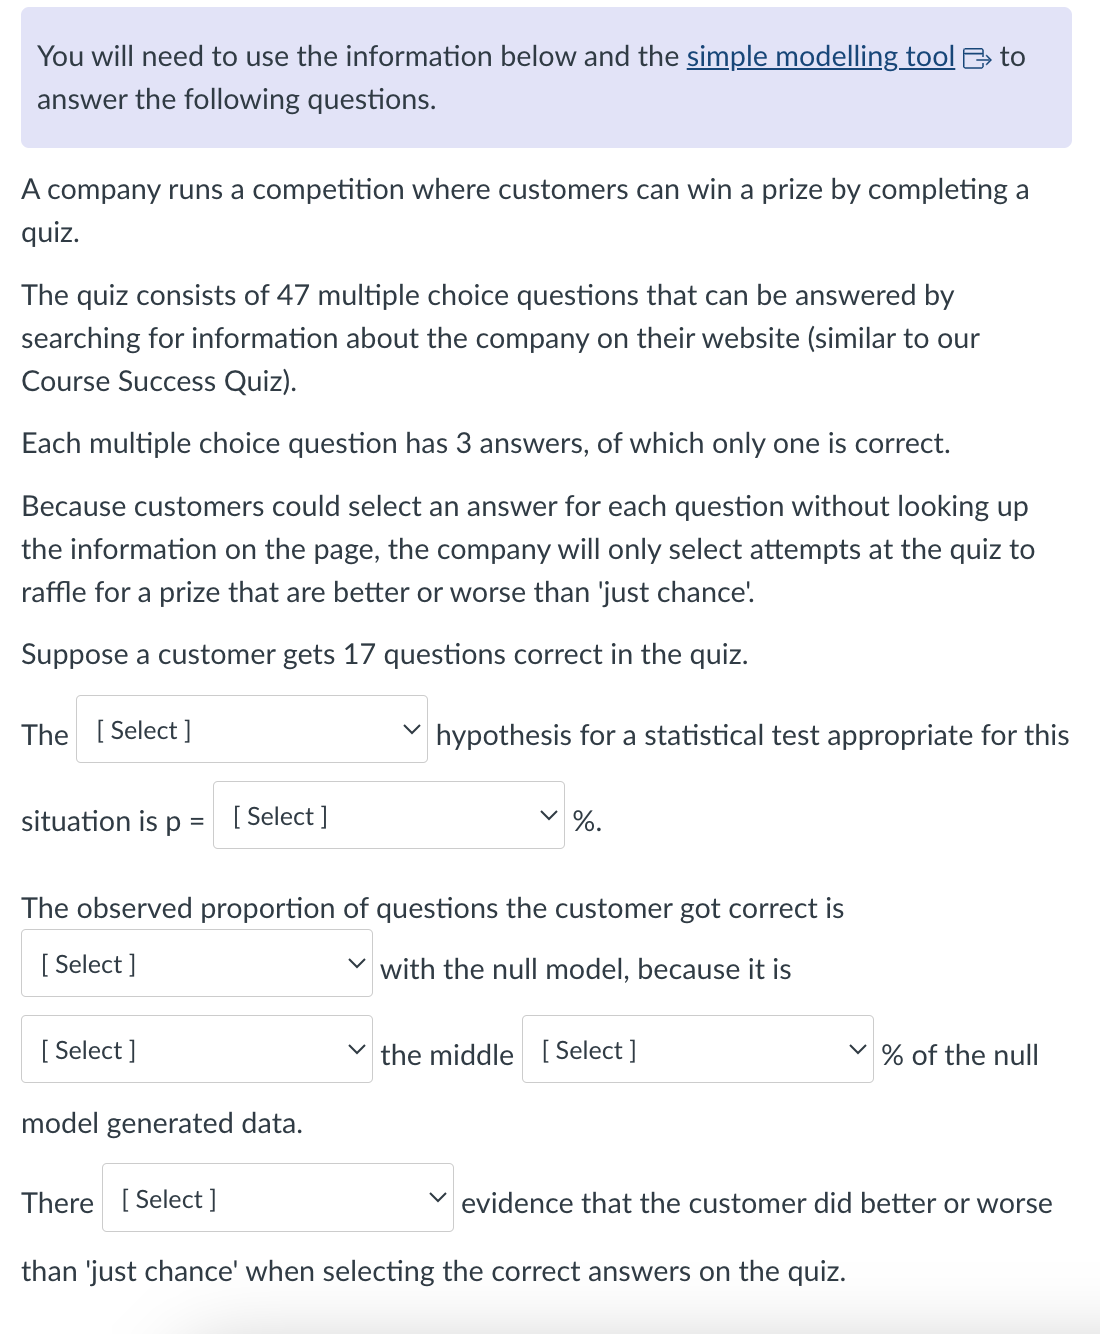 You will need to use the information below and the simple modelling tool >>> to
answer the following questions.
A company runs a competition where customers can win a prize by completing a
quiz.
The quiz consists of 47 multiple choice questions that can be answered by
searching for information about the company on their website (similar to our
Course Success Quiz).
Each multiple choice question has 3 answers, of which only one is correct.
Because customers could select an answer for each question without looking up
the information on the page, the company will only select attempts at the quiz to
raffle for a prize that are better or worse than 'just chance'.
Suppose a customer gets 17 questions correct in the quiz.
The [Select]
hypothesis for a statistical test appropriate for this
%.
situation is p = [Select]
The observed proportion of questions the customer got correct is
[Select]
with the null model, because it is
[Select]
the middle [Select]
% of the null
model generated data.
There [Select]
evidence that the customer did better or worse
than 'just chance' when selecting the correct answers on the quiz.